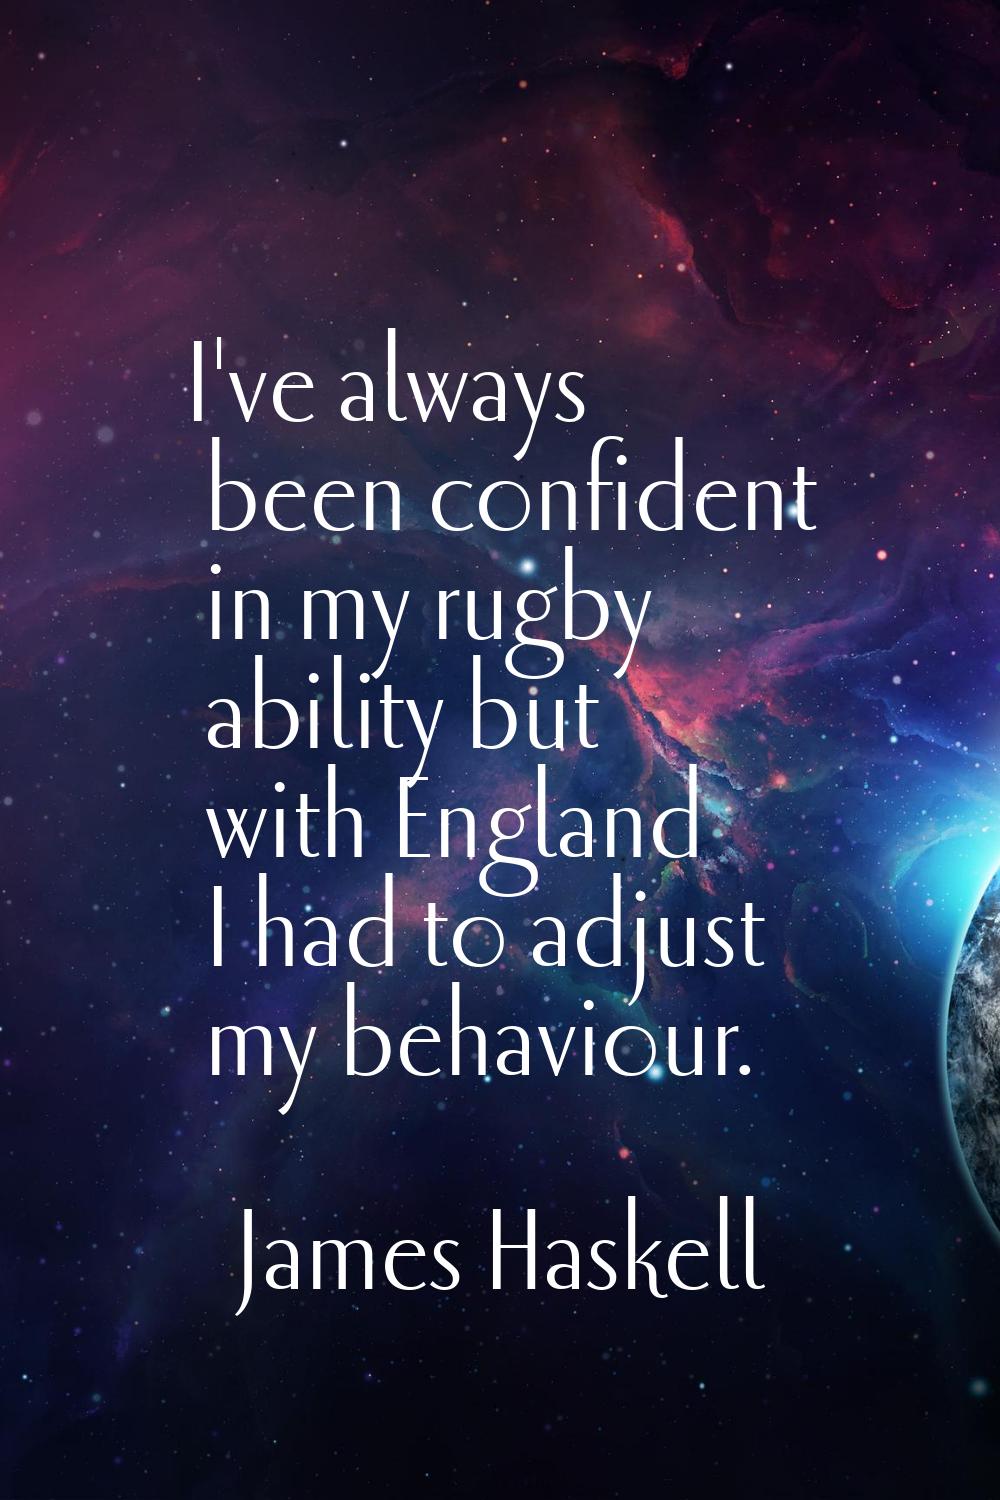 I've always been confident in my rugby ability but with England I had to adjust my behaviour.